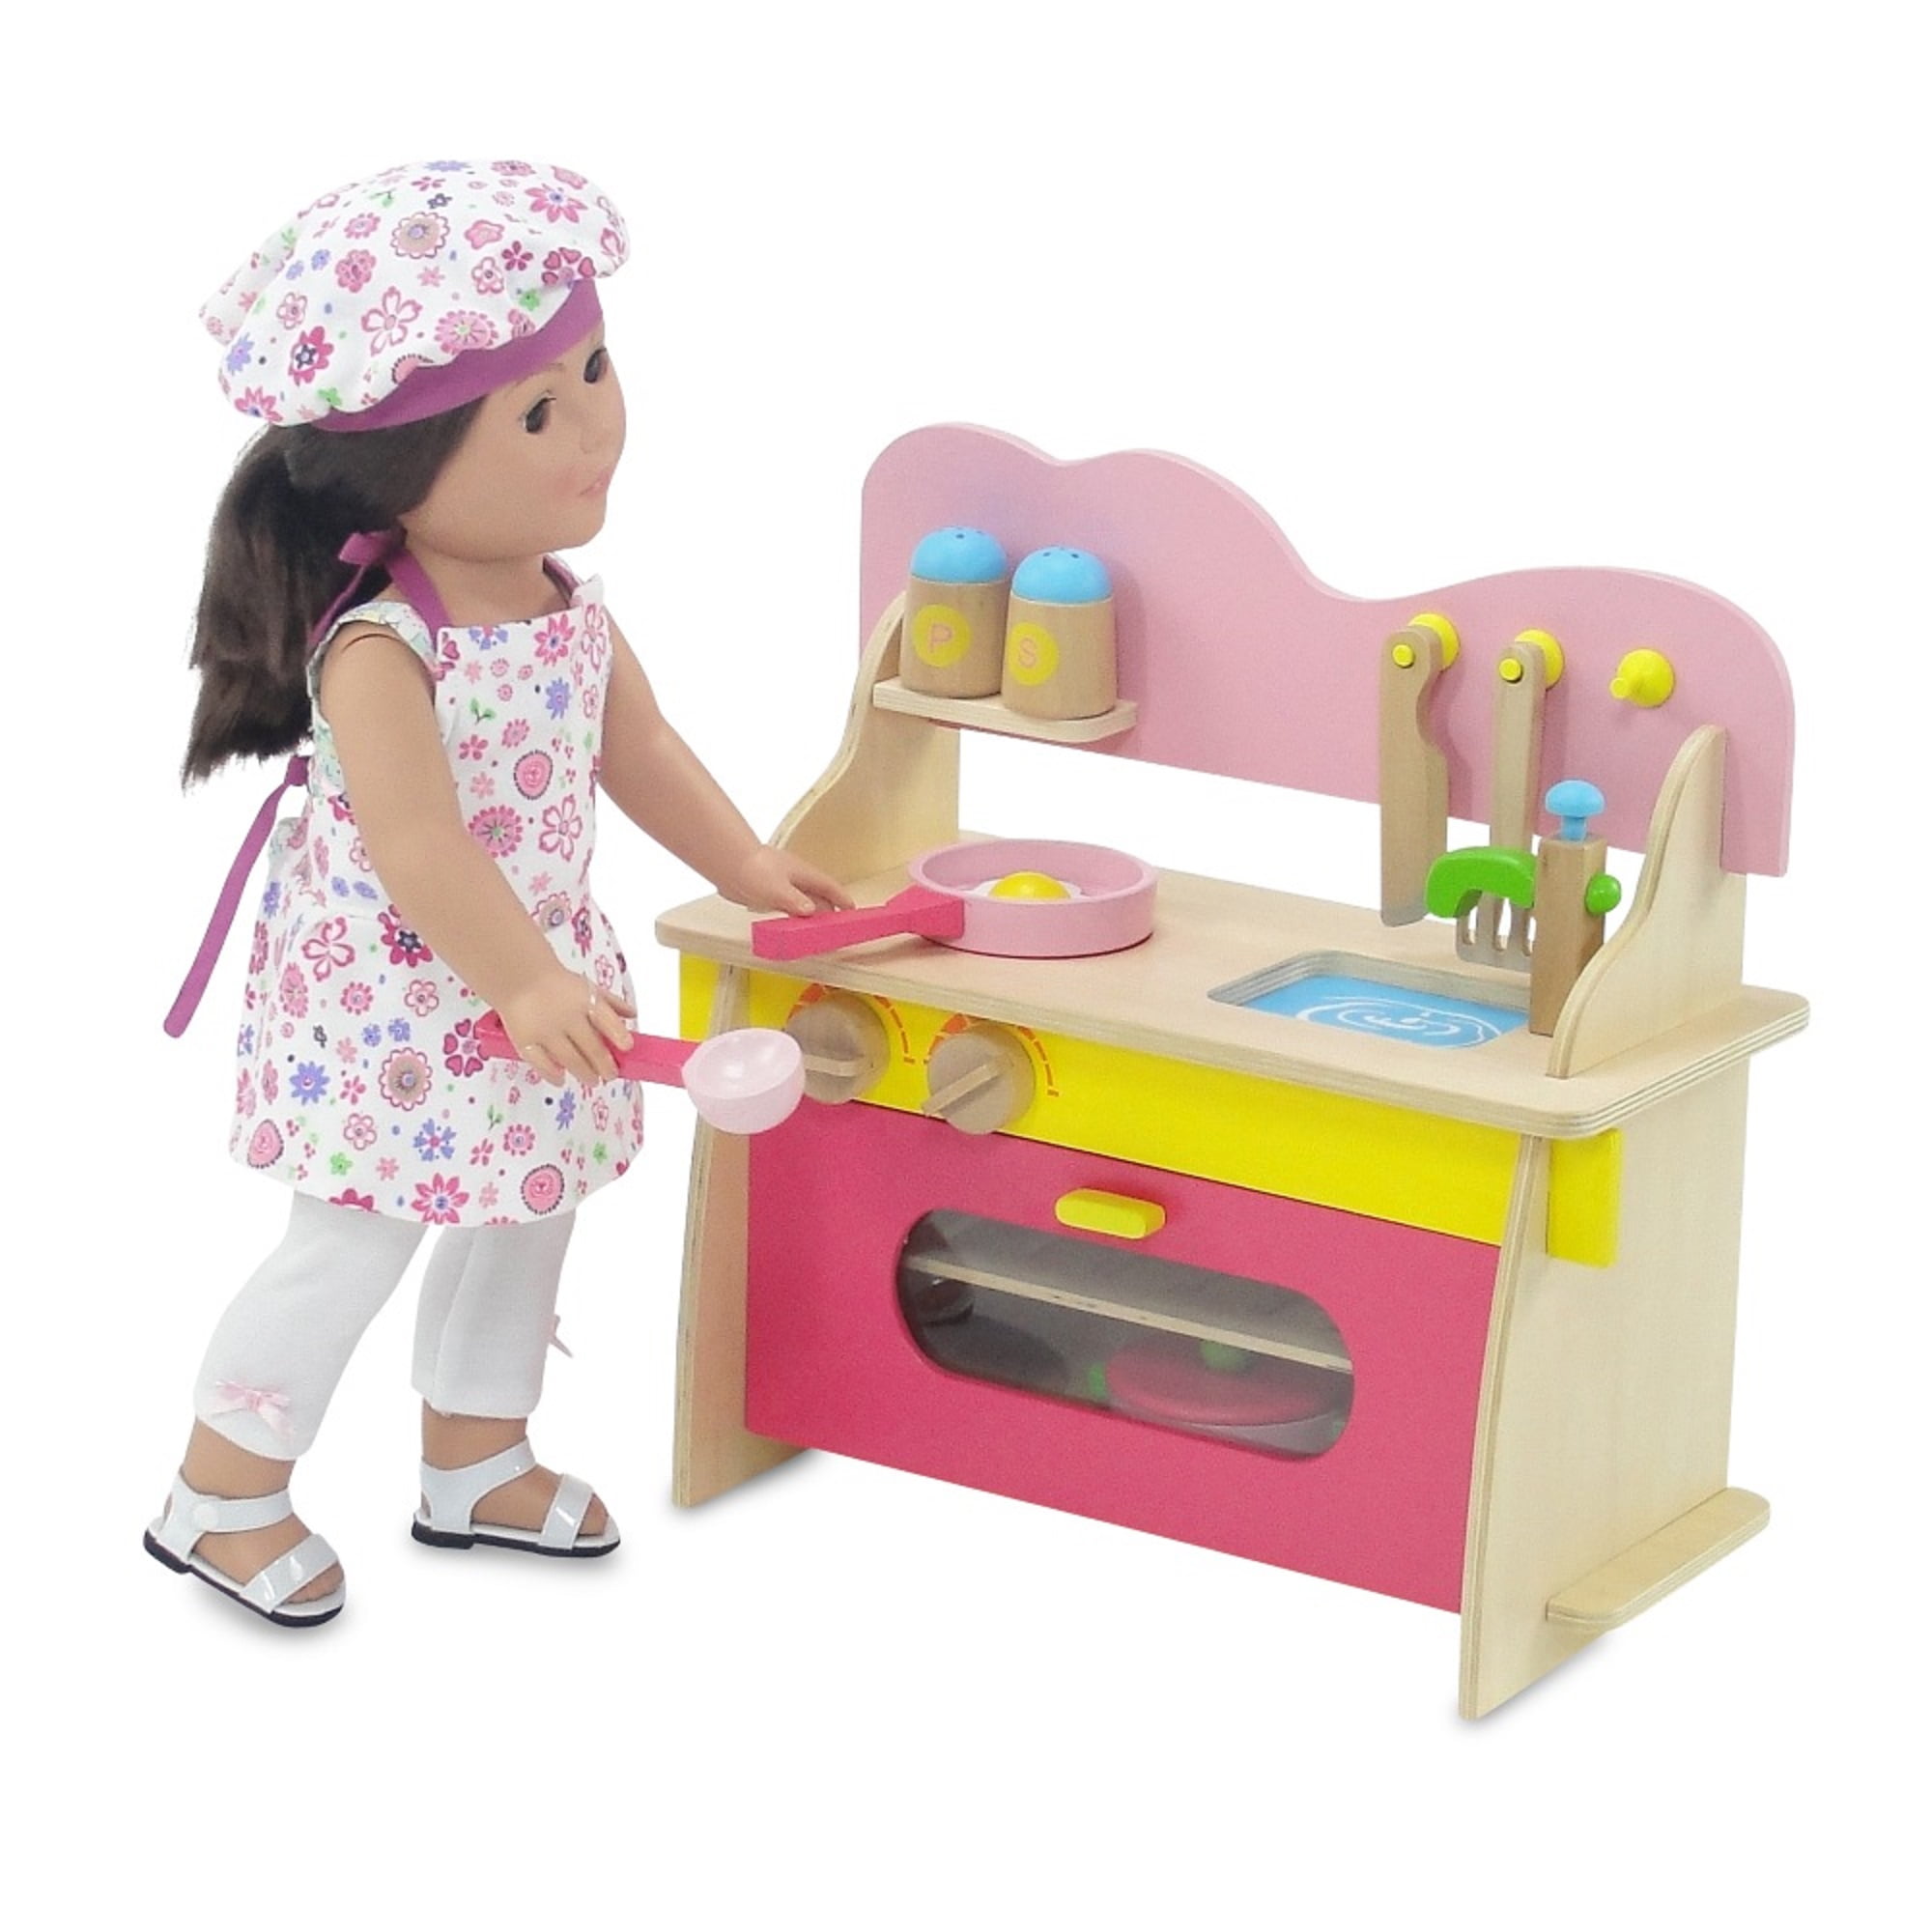 Le Toy Van - Colorful Wooden Honeybake Oven & Hob Pink Set | Wood Pretend  Play Kitchen Toy Set | Girls and Boys Role Play Toy Kitchen Accessories